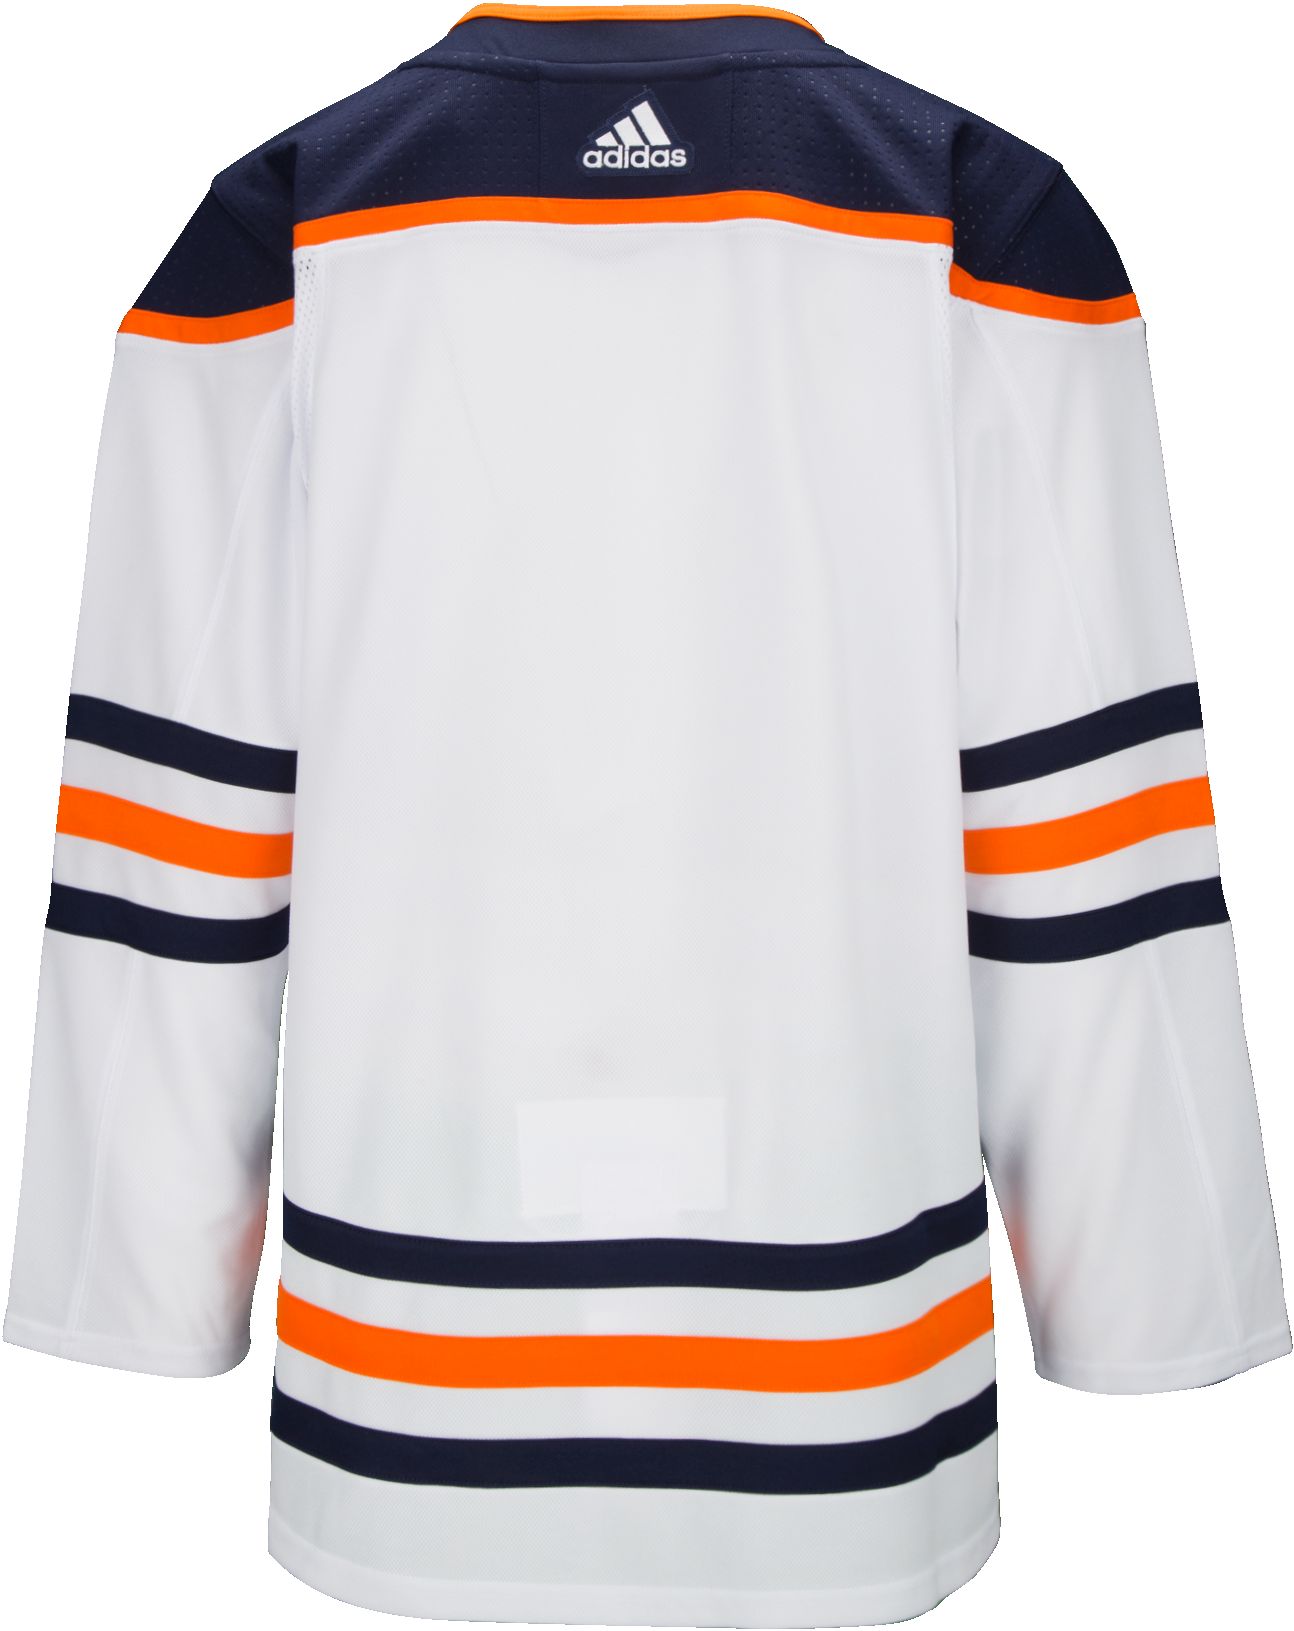 ANY NAME AND NUMBER EDMONTON OILERS REVERSE RETRO AUTHENTIC PRO ADIDAS –  Hockey Authentic